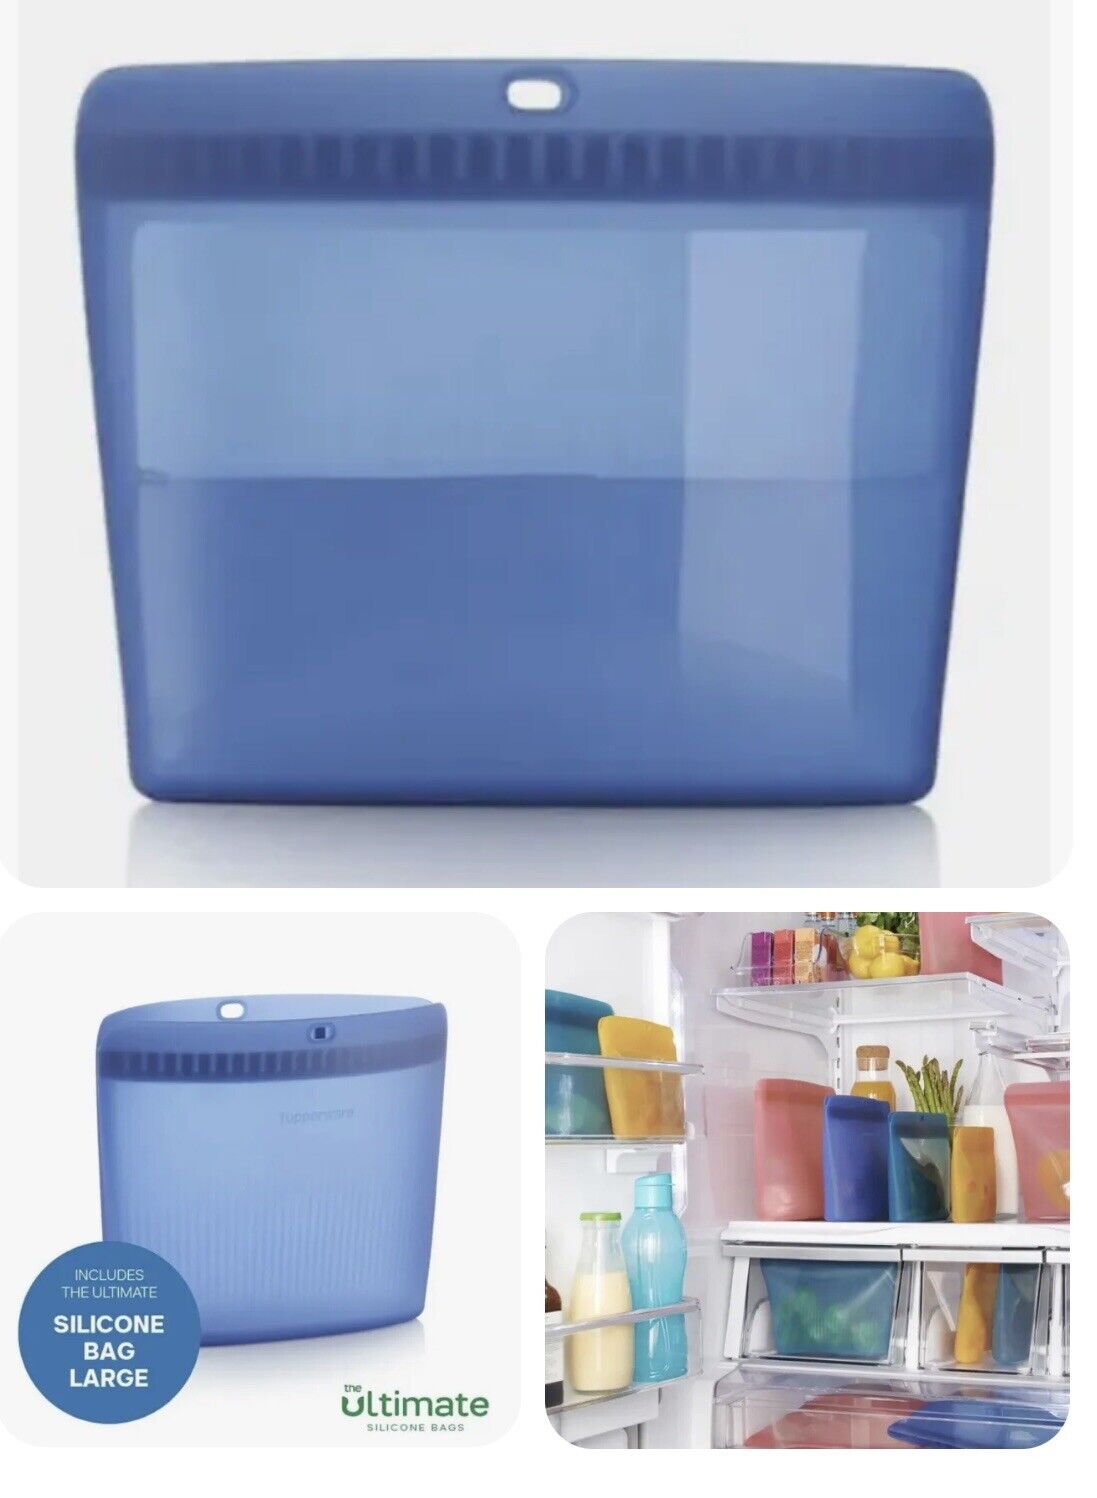 Tupperware Large Blue Ultimate Silicone Bag freezer Oven, Microwave Safe NEW